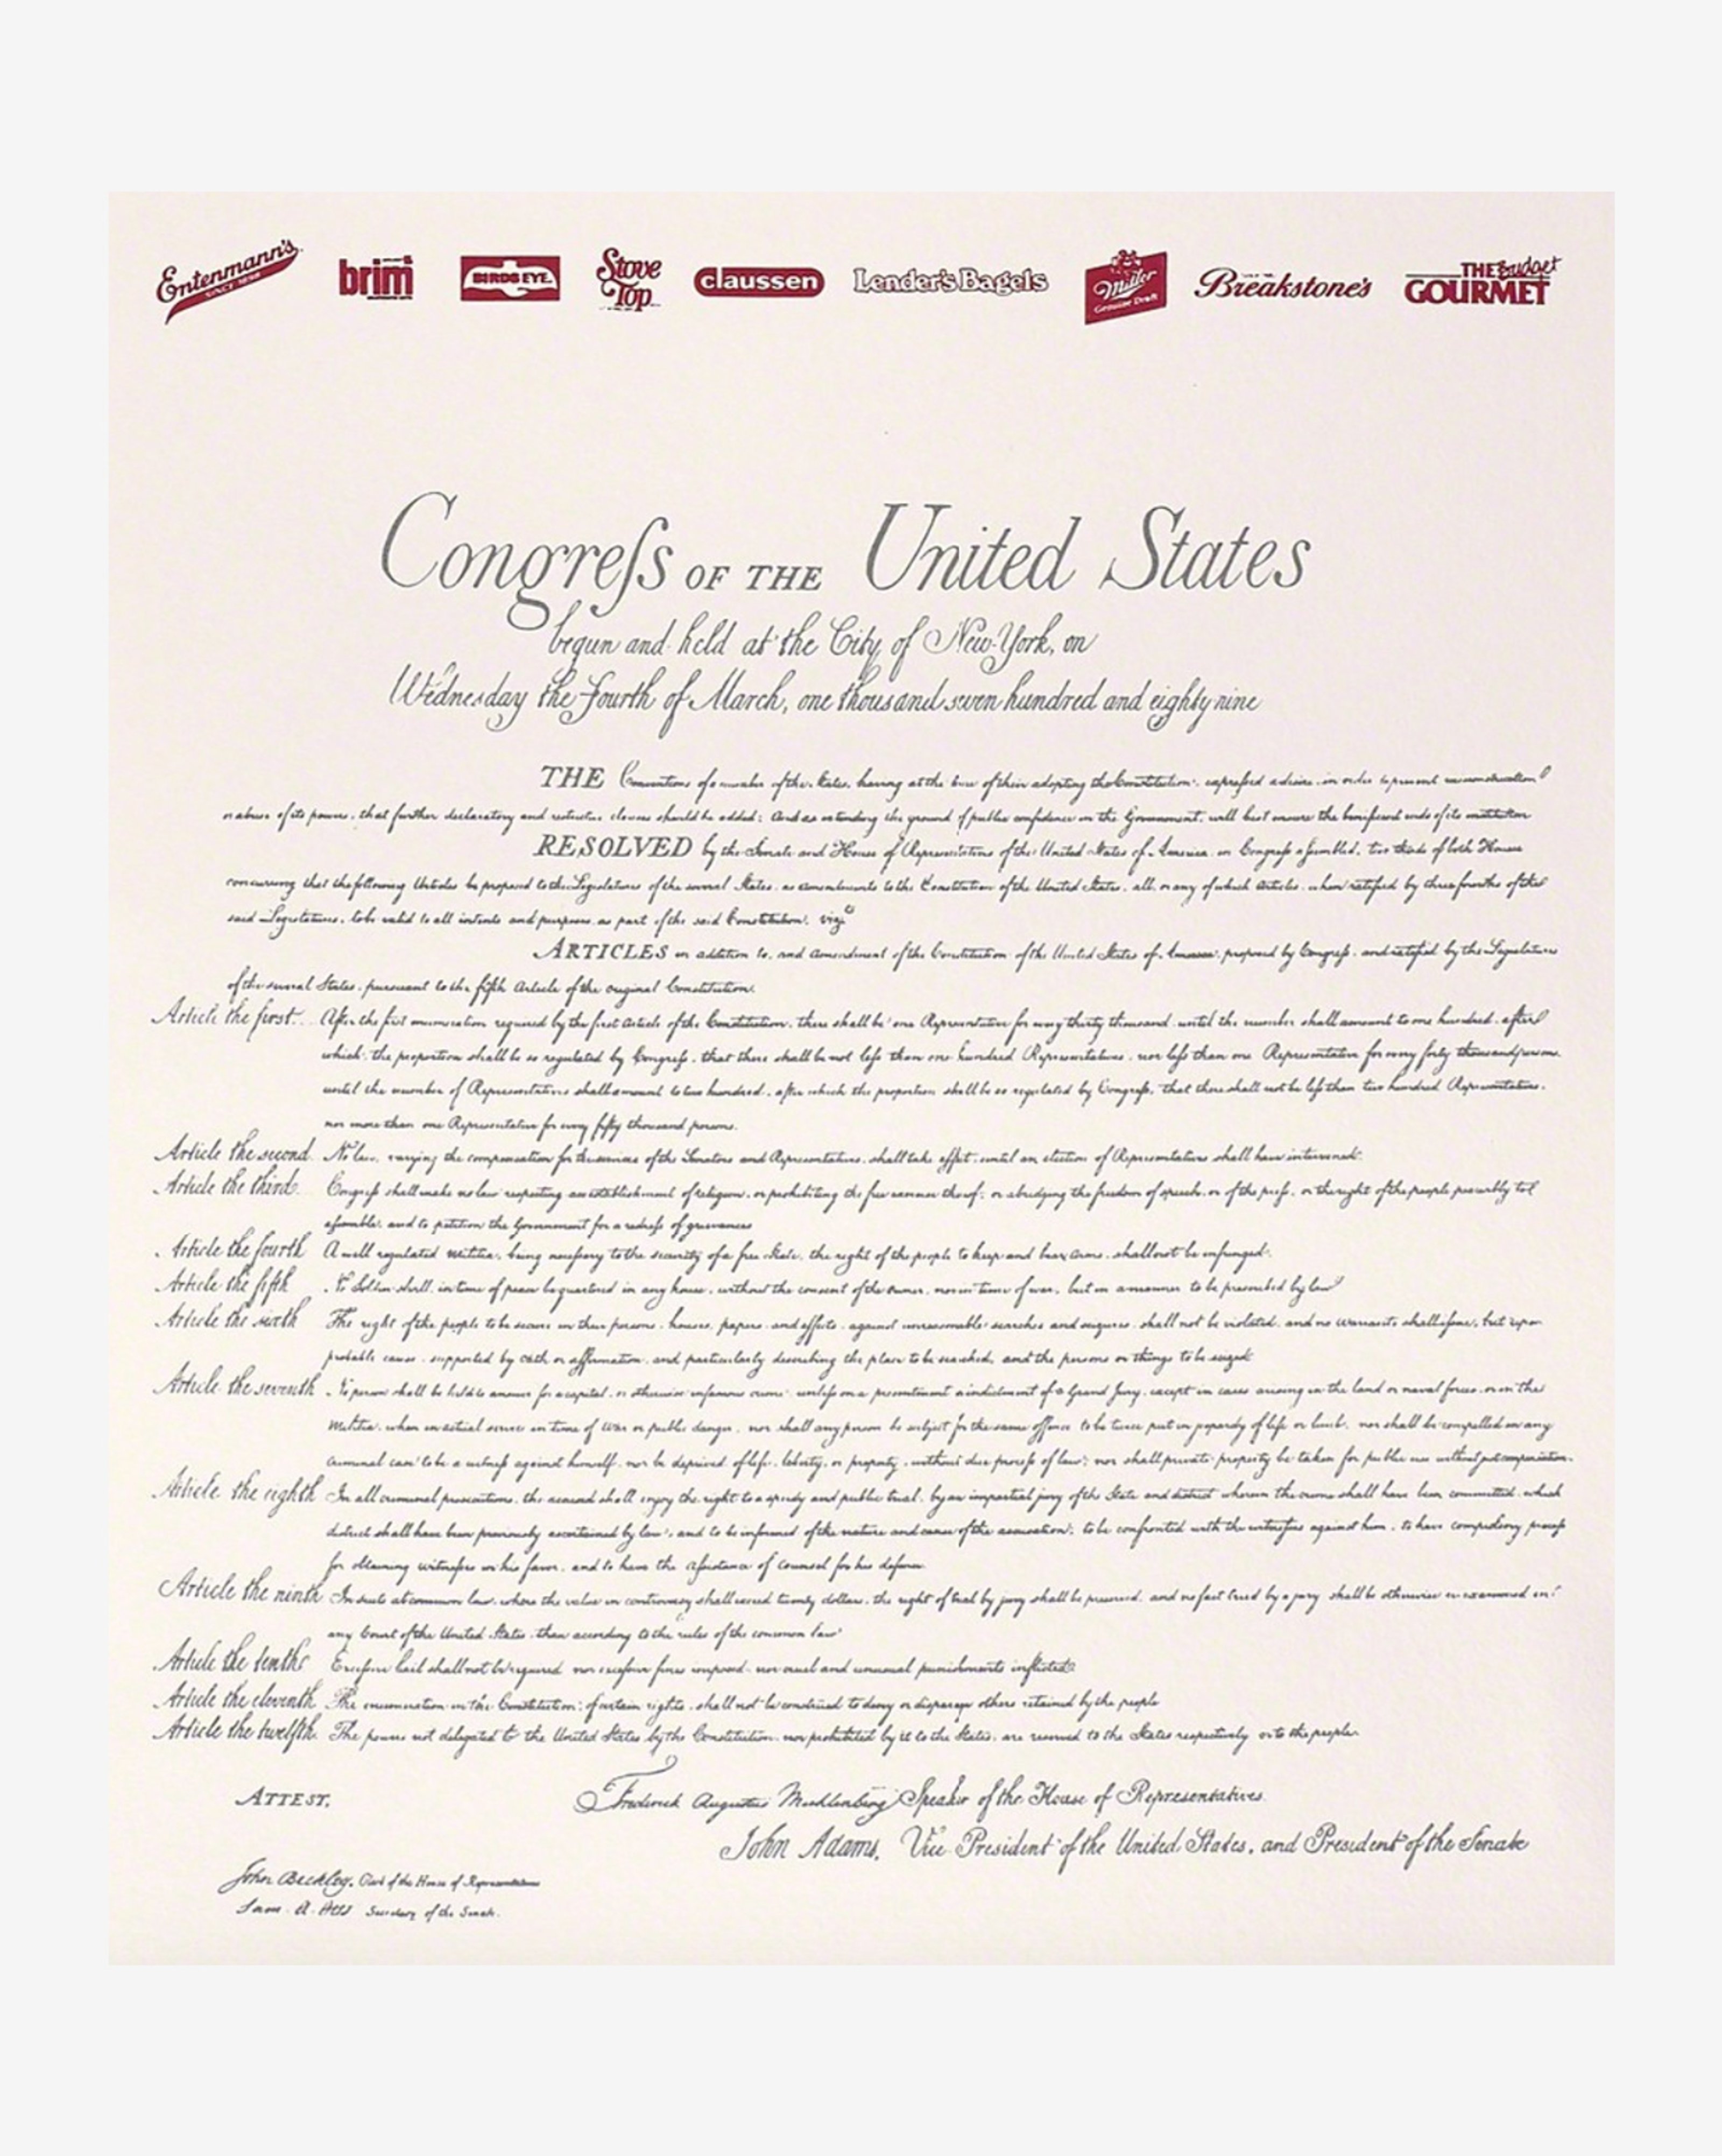 An old agreement from United States with italic hand writing